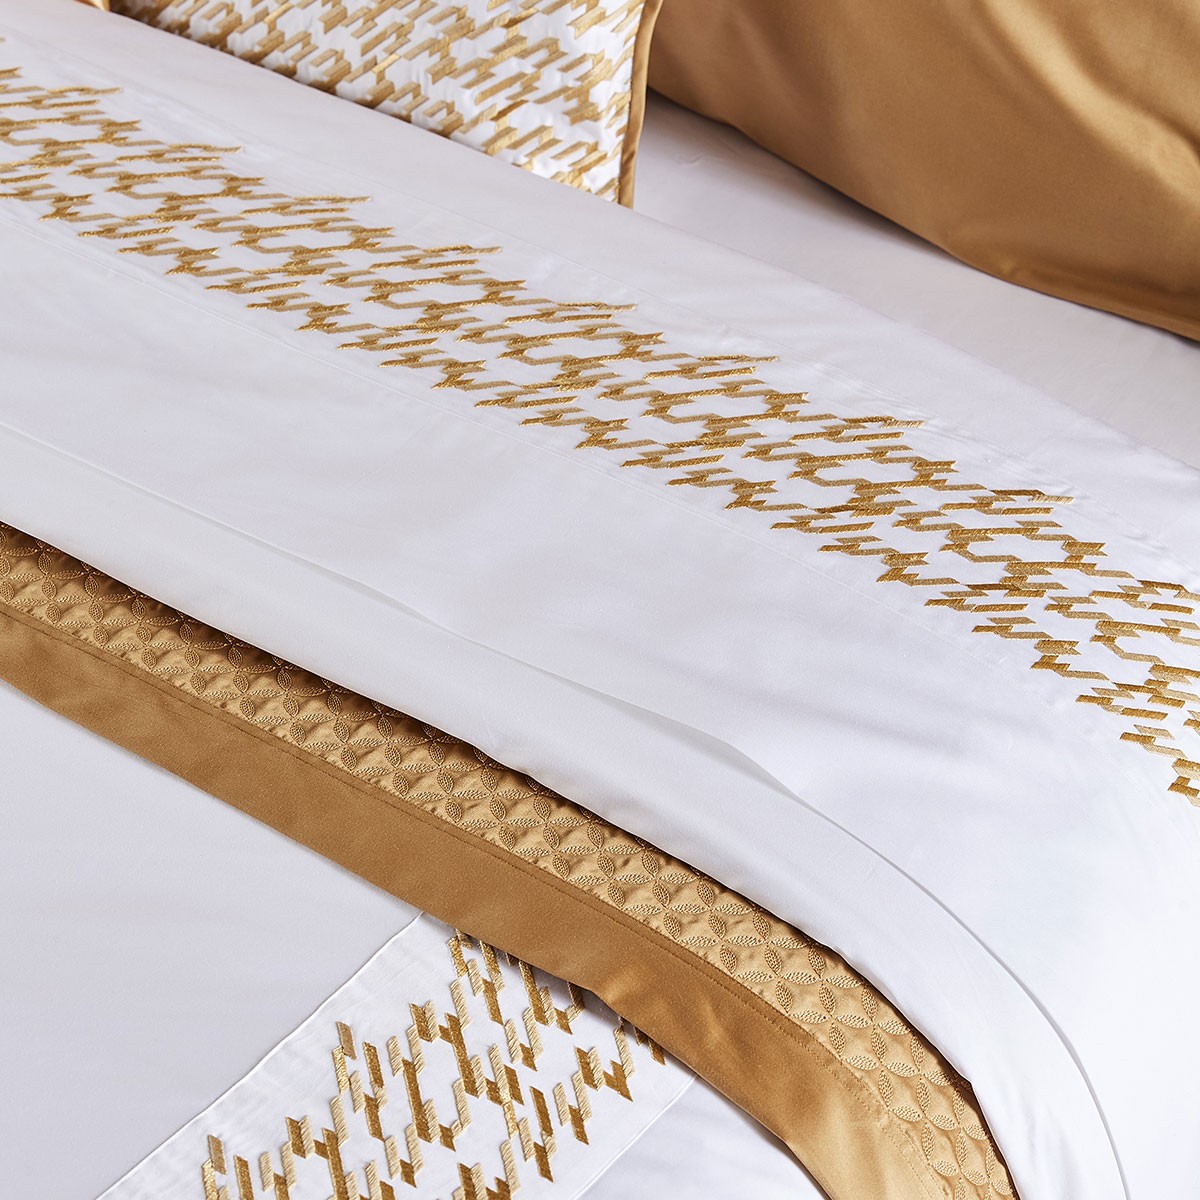 Alto Bed Linen Collection | Yves Delorme Couture